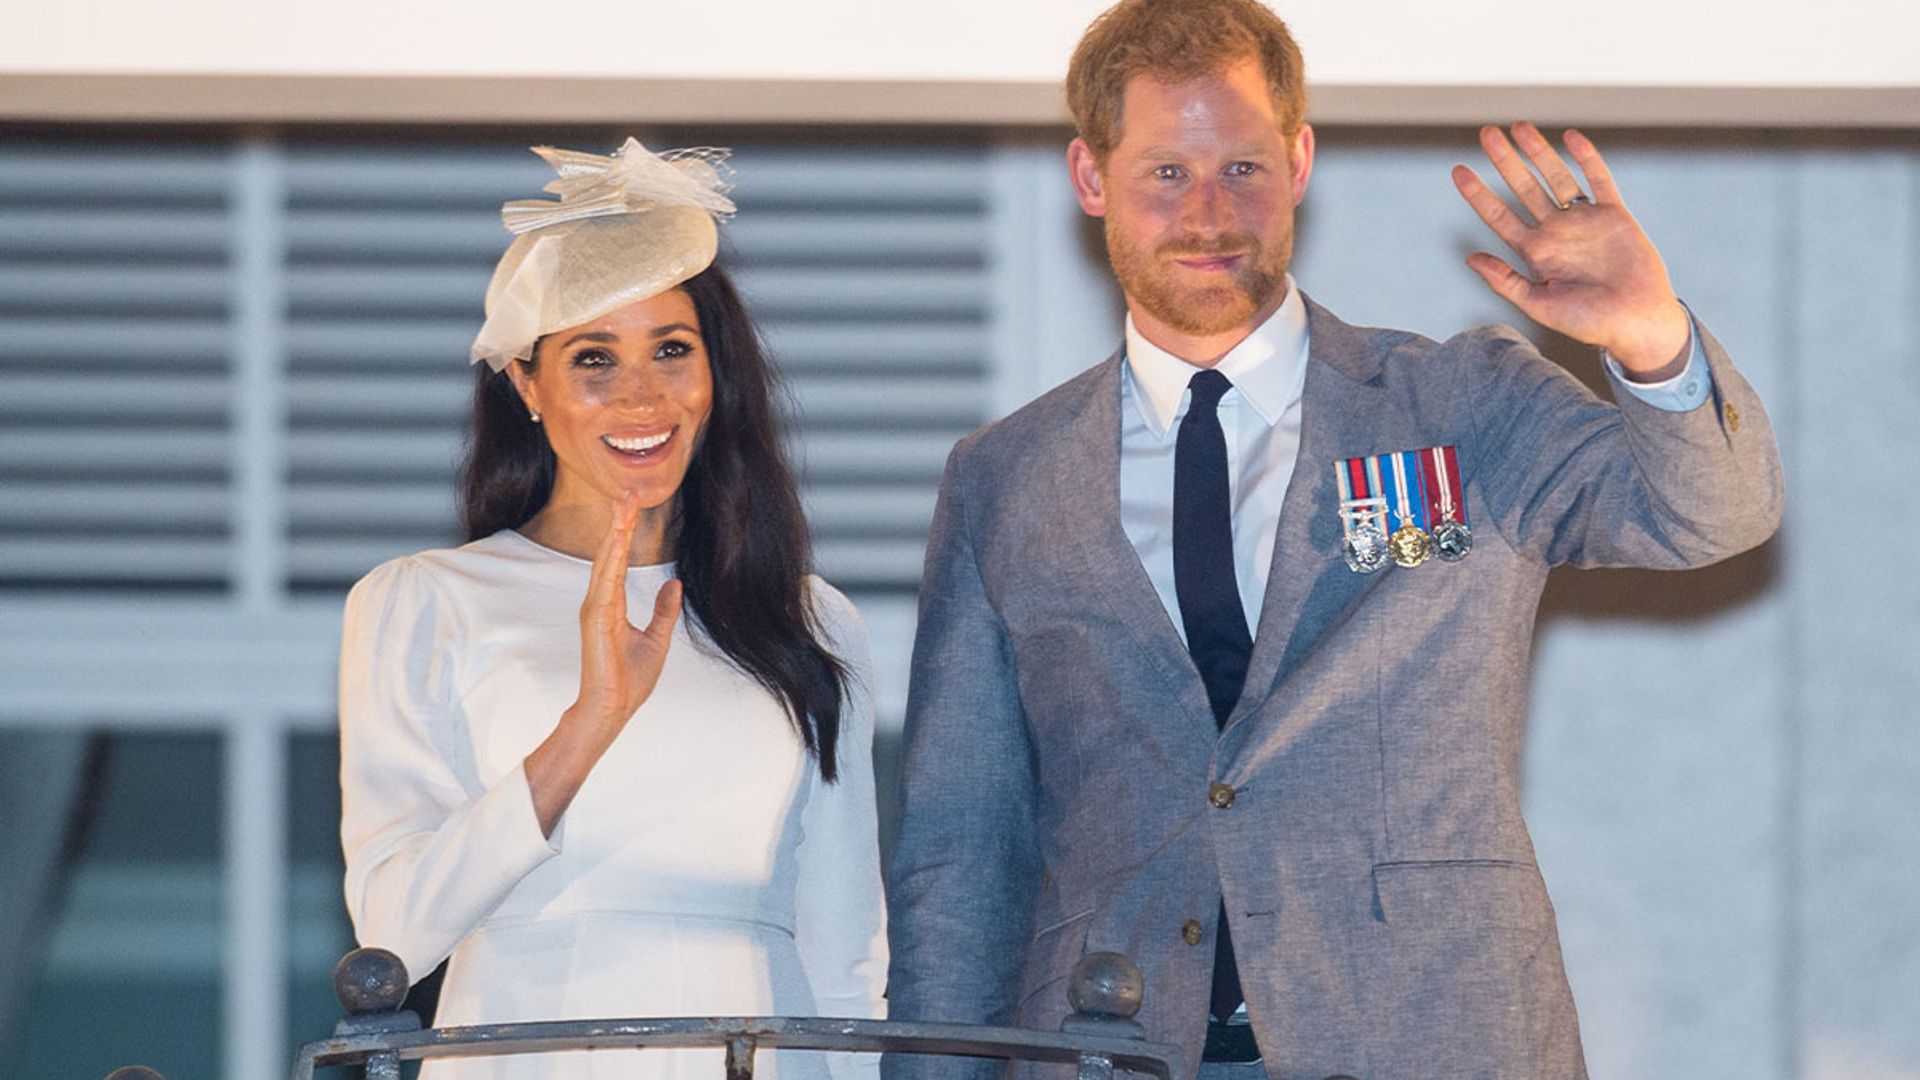 When will Prince Harry and Meghan Markle be back in the UK?